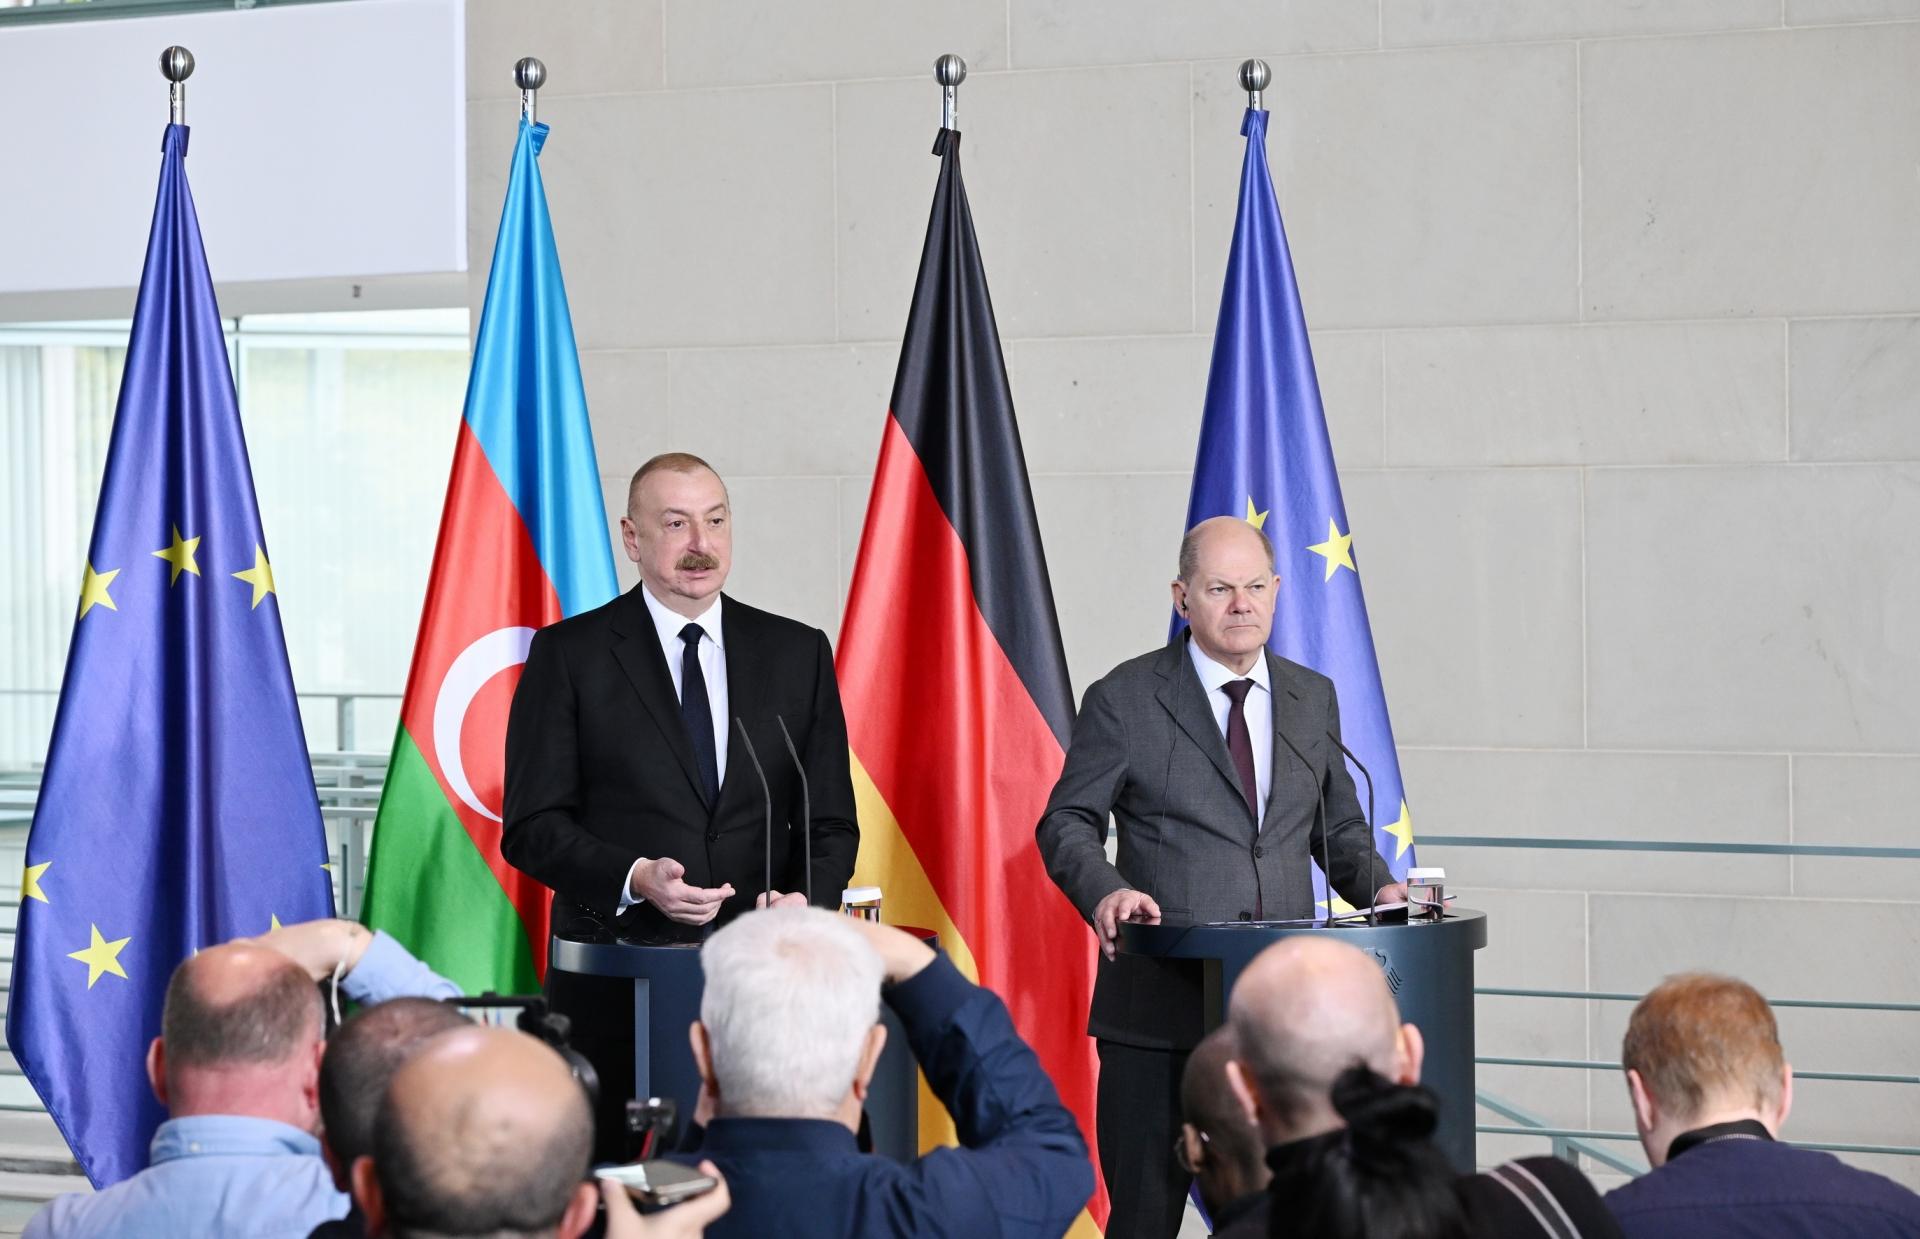 President Ilham Aliyev and Chancellor Scholz making press statements